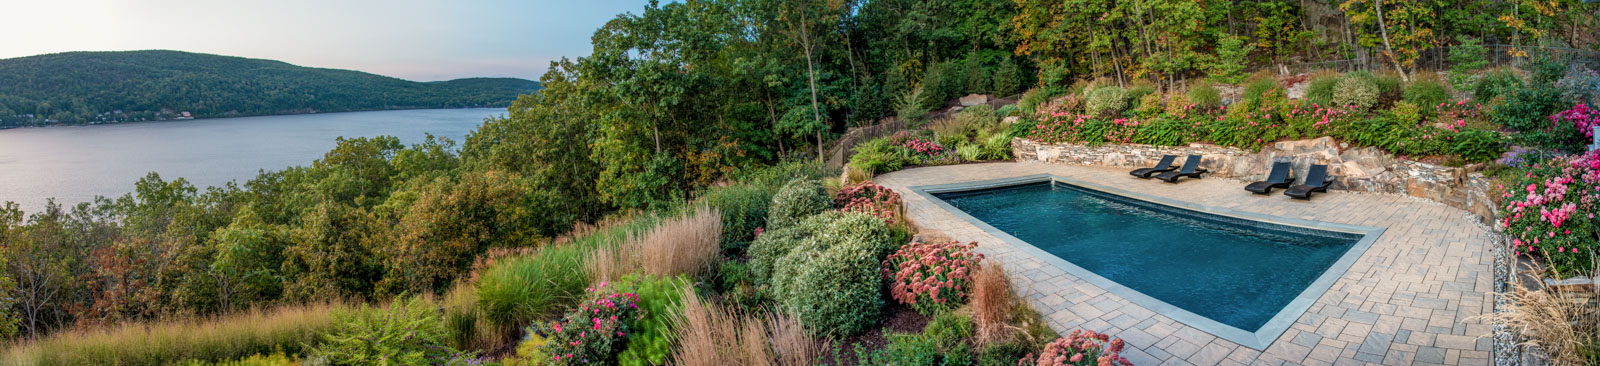 heavily planted slope leading to pool area